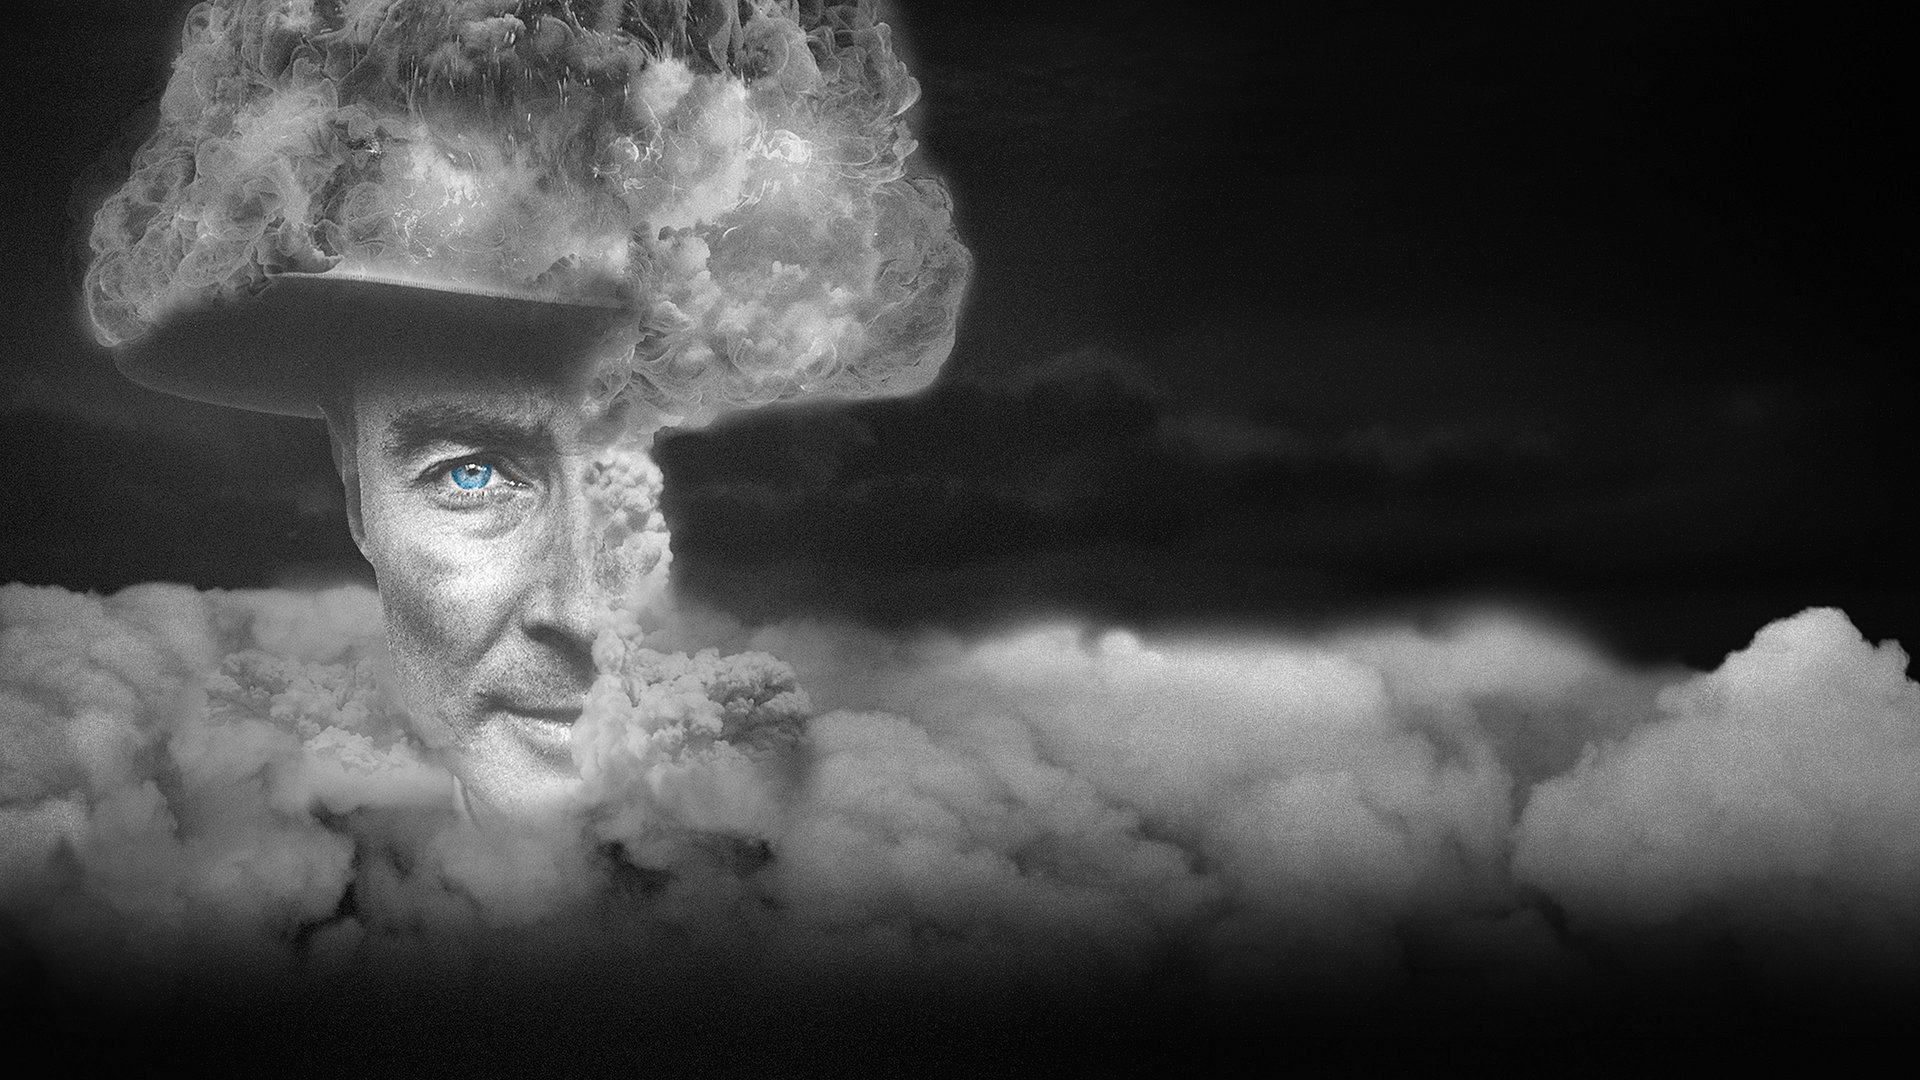 To End All War: Oppenheimer and the Atomic Bomb